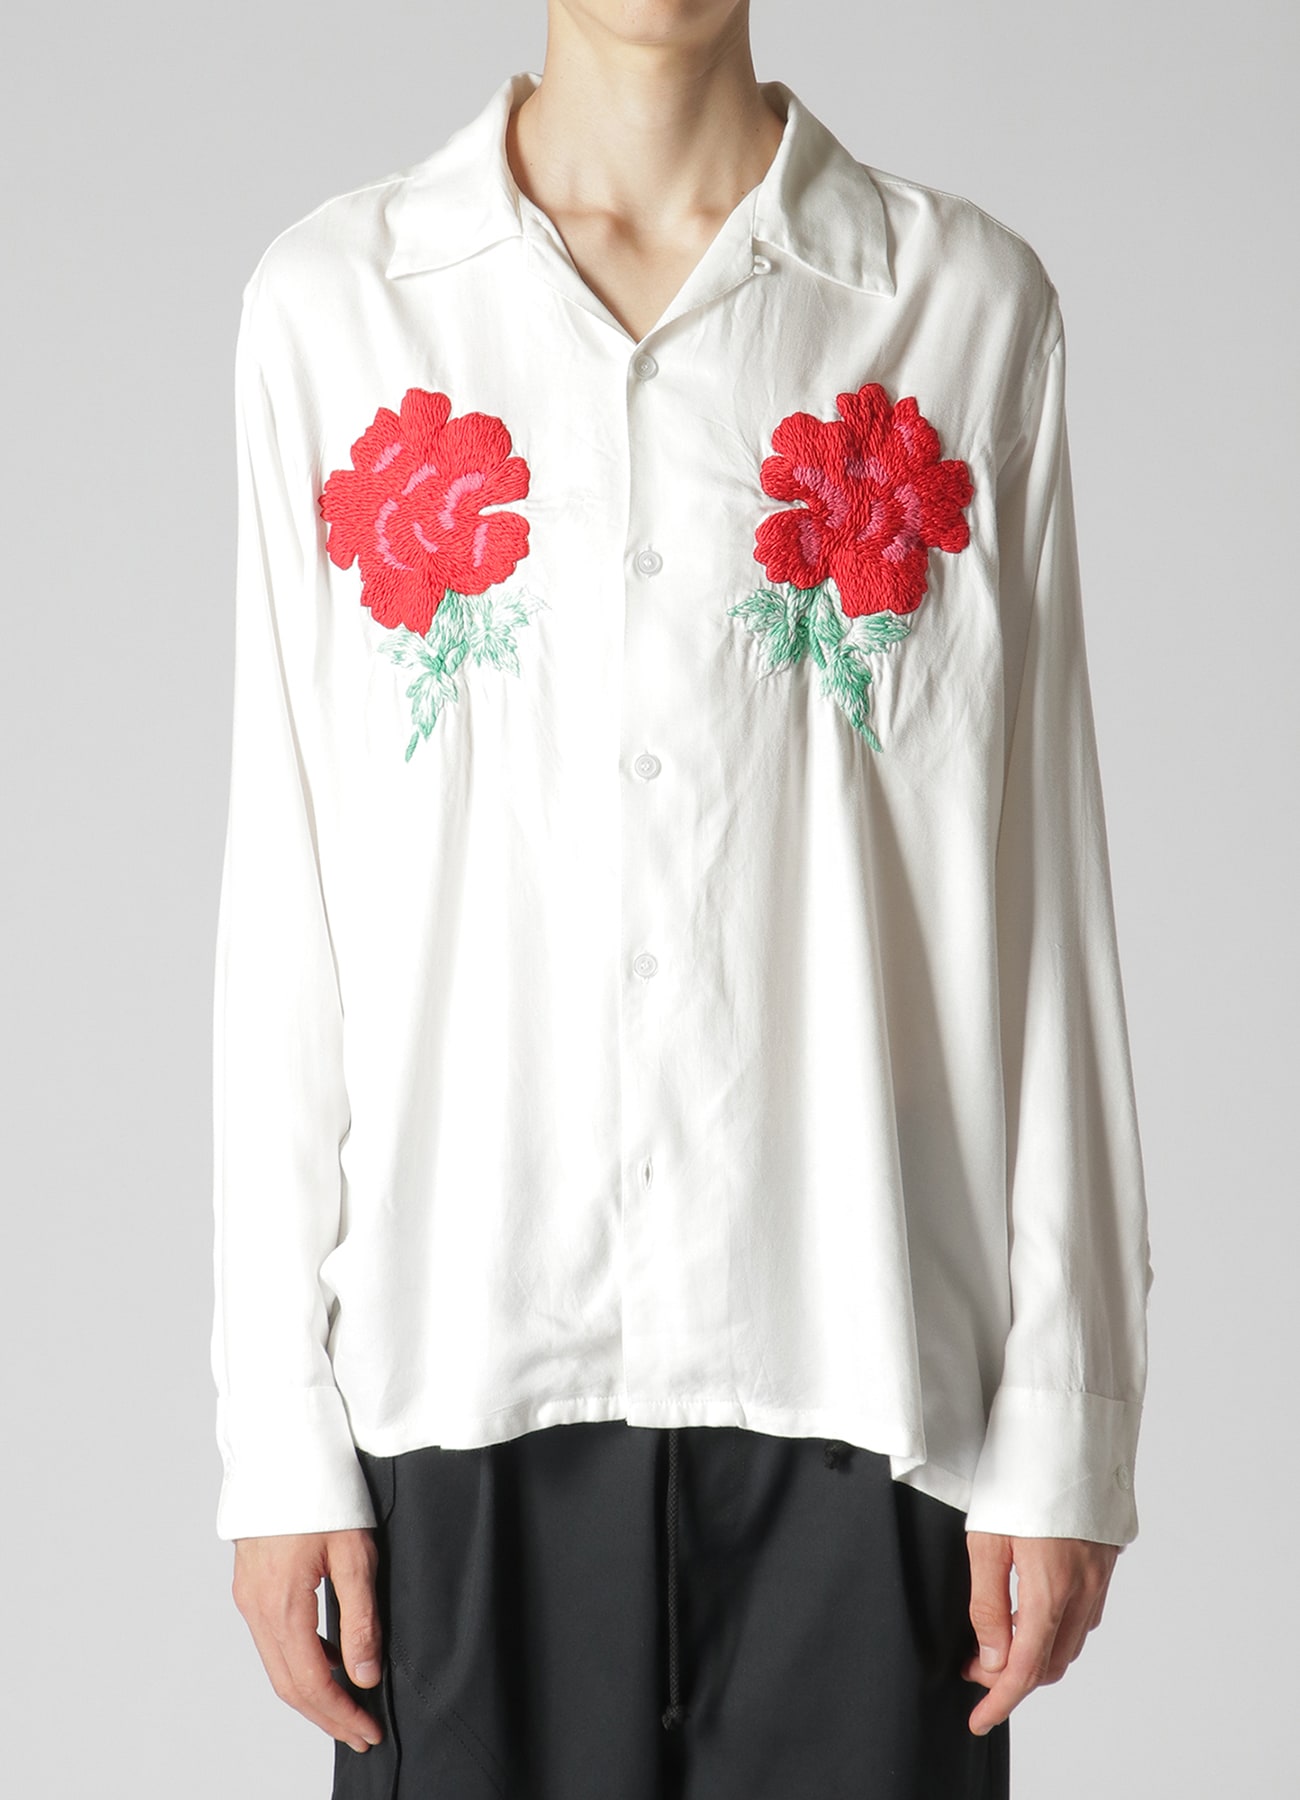 WILDSIDE × NOMA t.d. HAND EMBROIDERY Shirt(M WHITE): NOMAbloc｜WILDSIDE